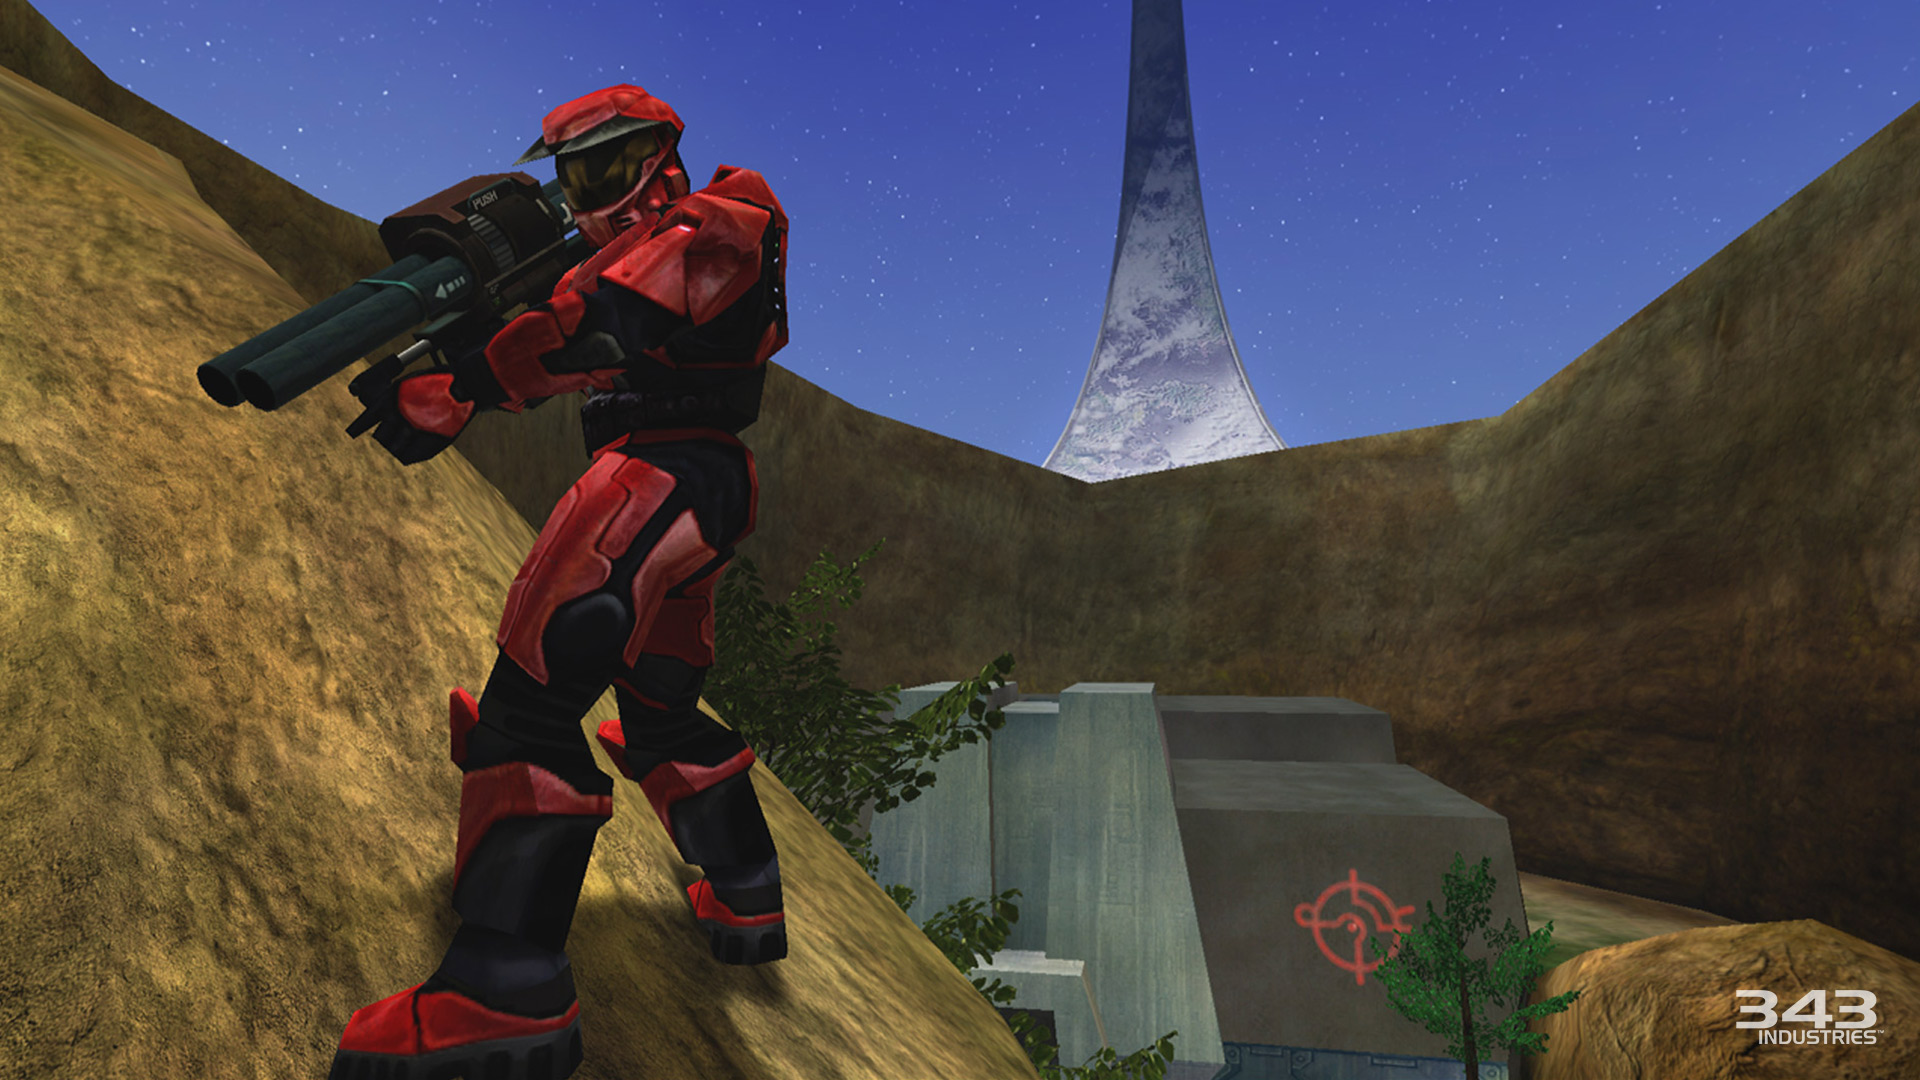 Halo: Combat Evolved Xbox One Gets New Screenshots - GameSpot